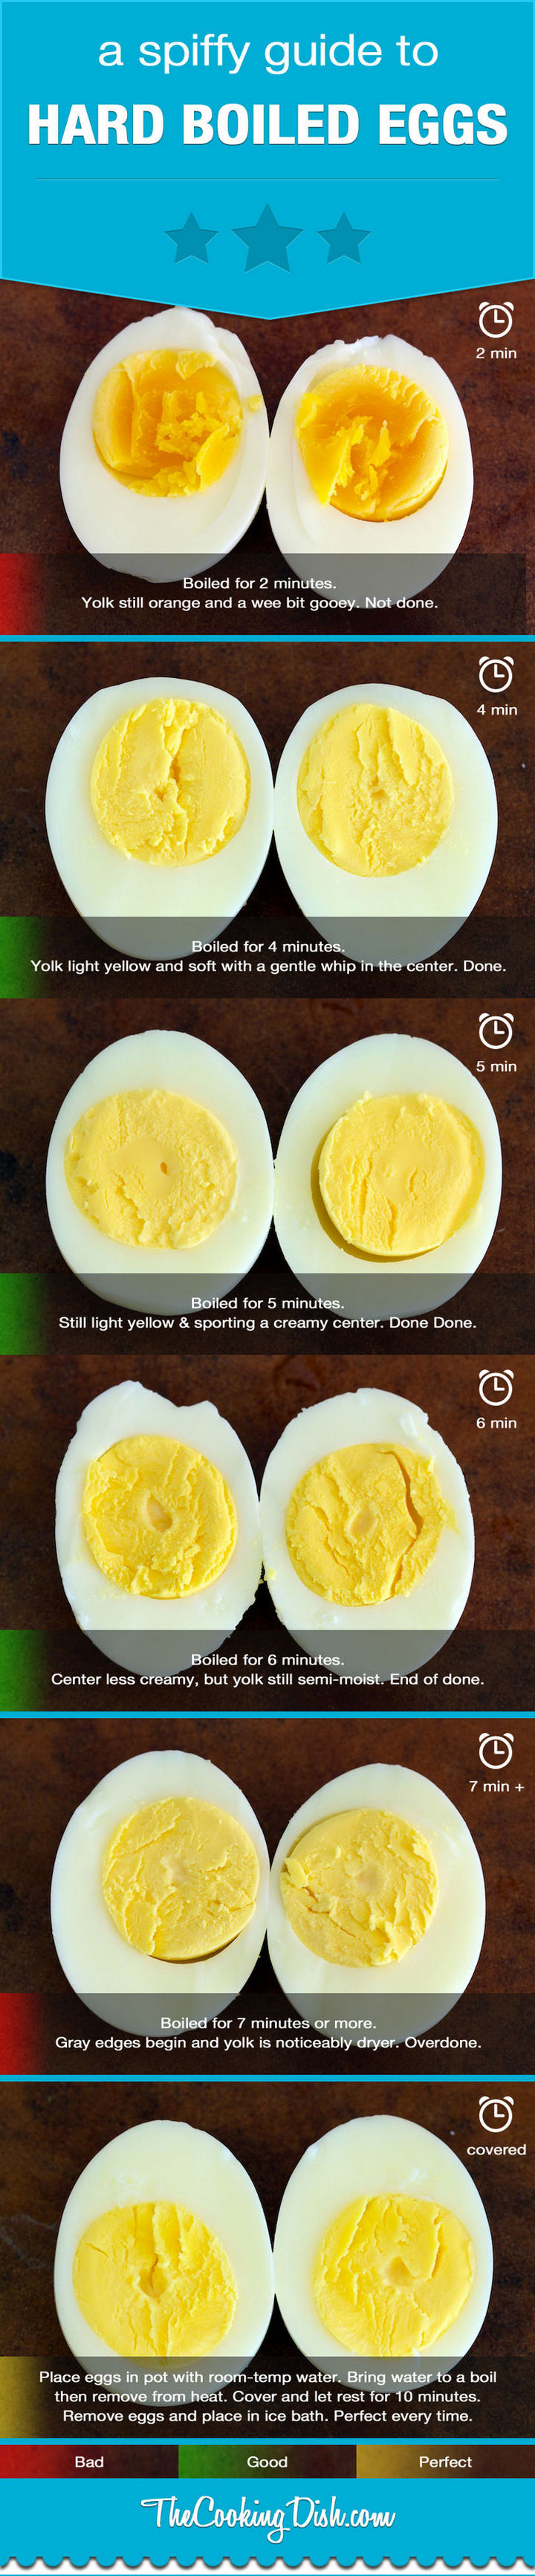 15 Kitchen Cheat Sheets - A spiffy guide to hard boiled eggs.